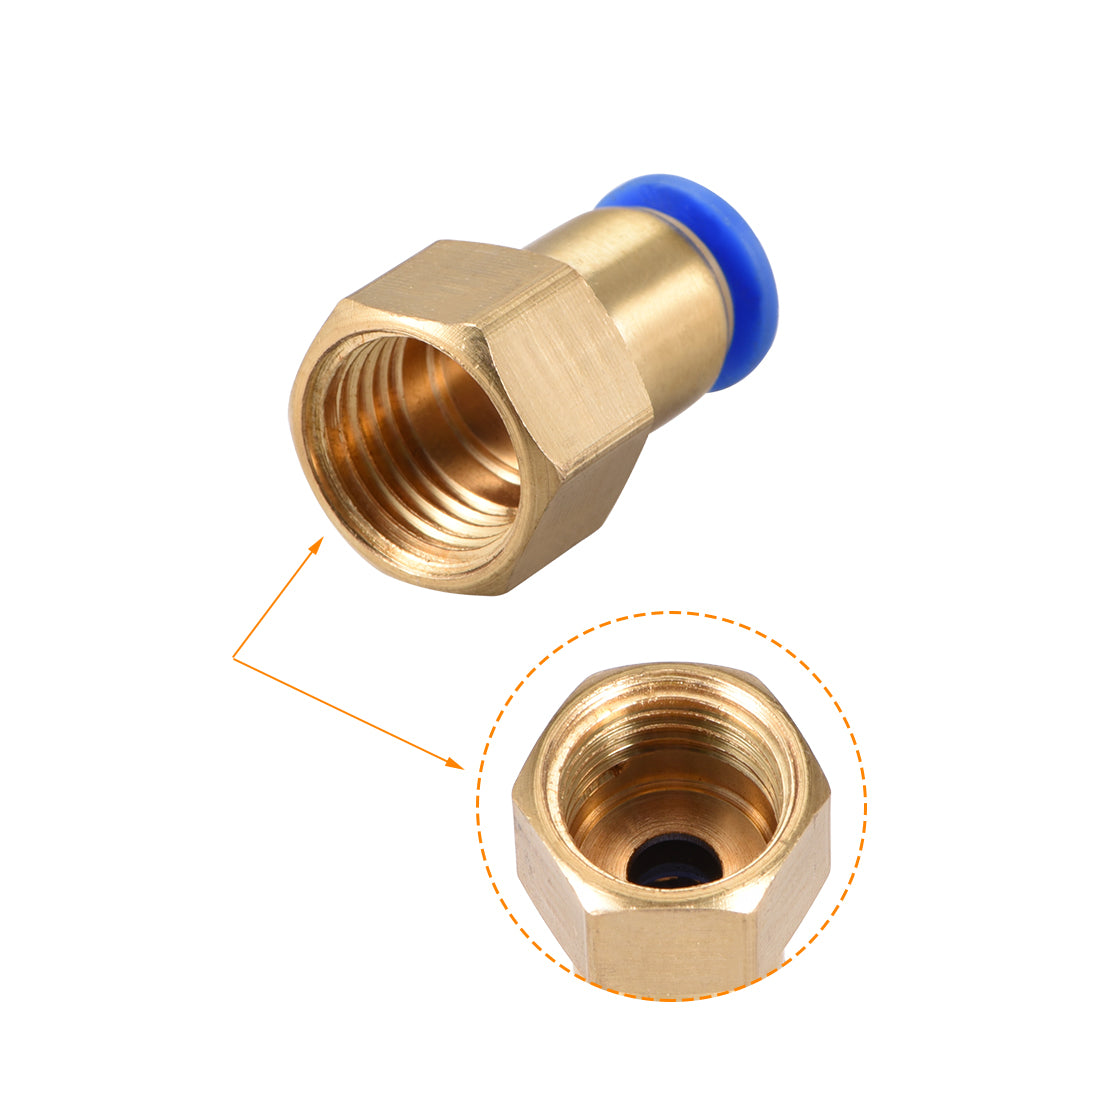 uxcell Uxcell Push to Connect Tube Fitting Adapter 6mm OD x G1/4" Female 2pcs